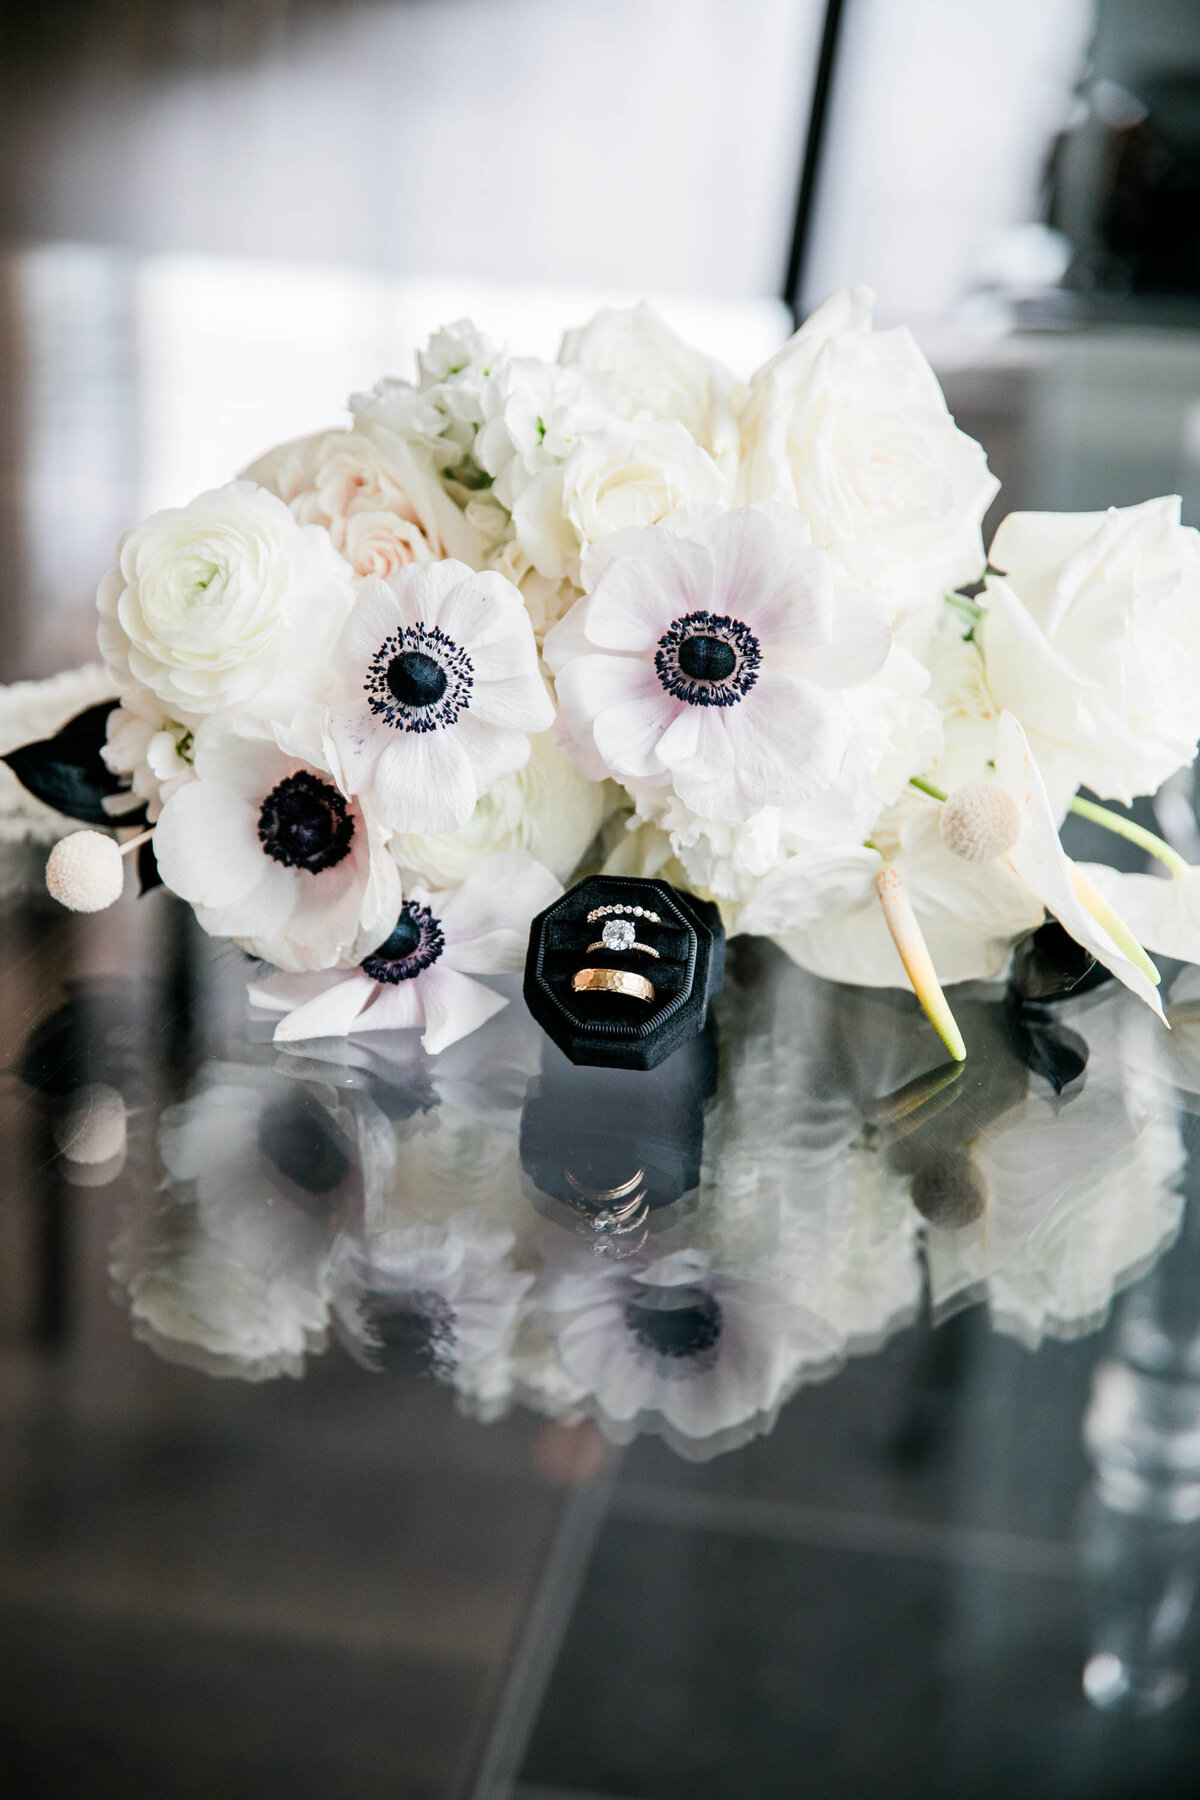 bouquet and rings on glass table